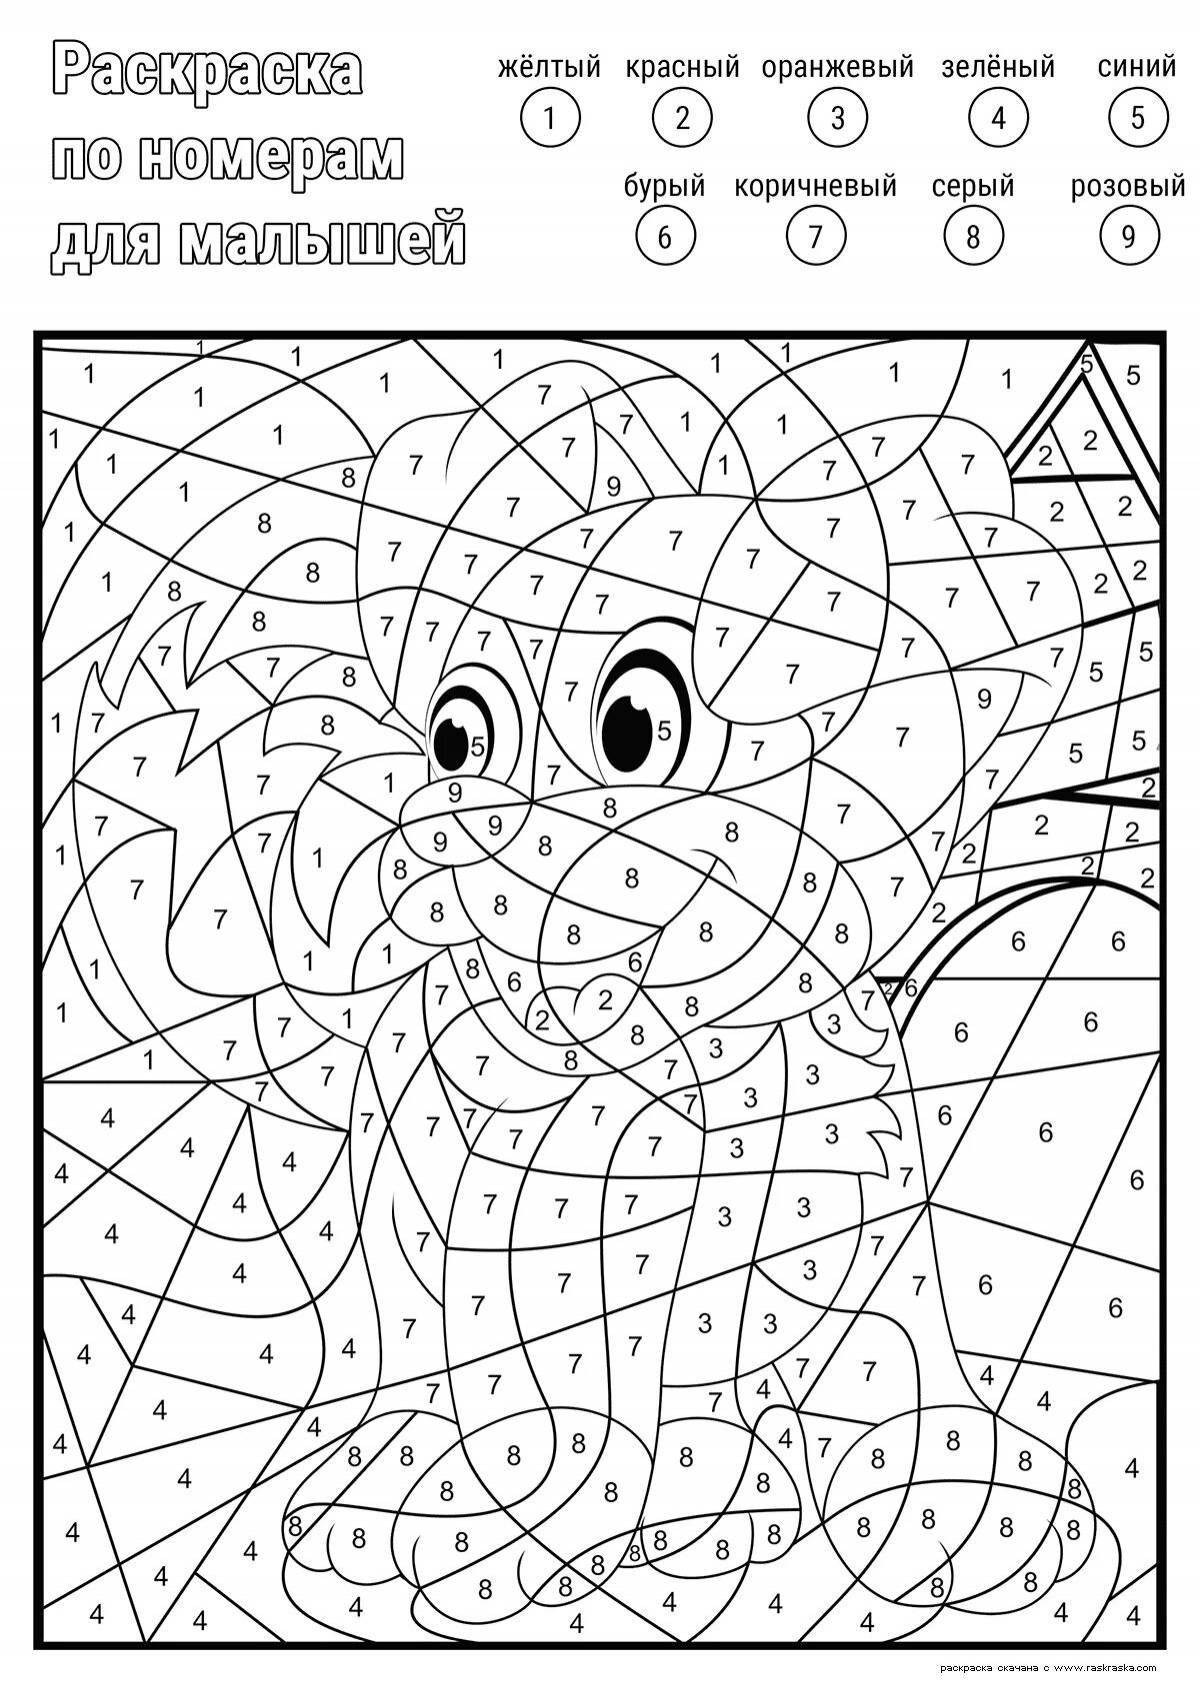 Charming coloring by numbers for 7 year olds with arithmetic examples